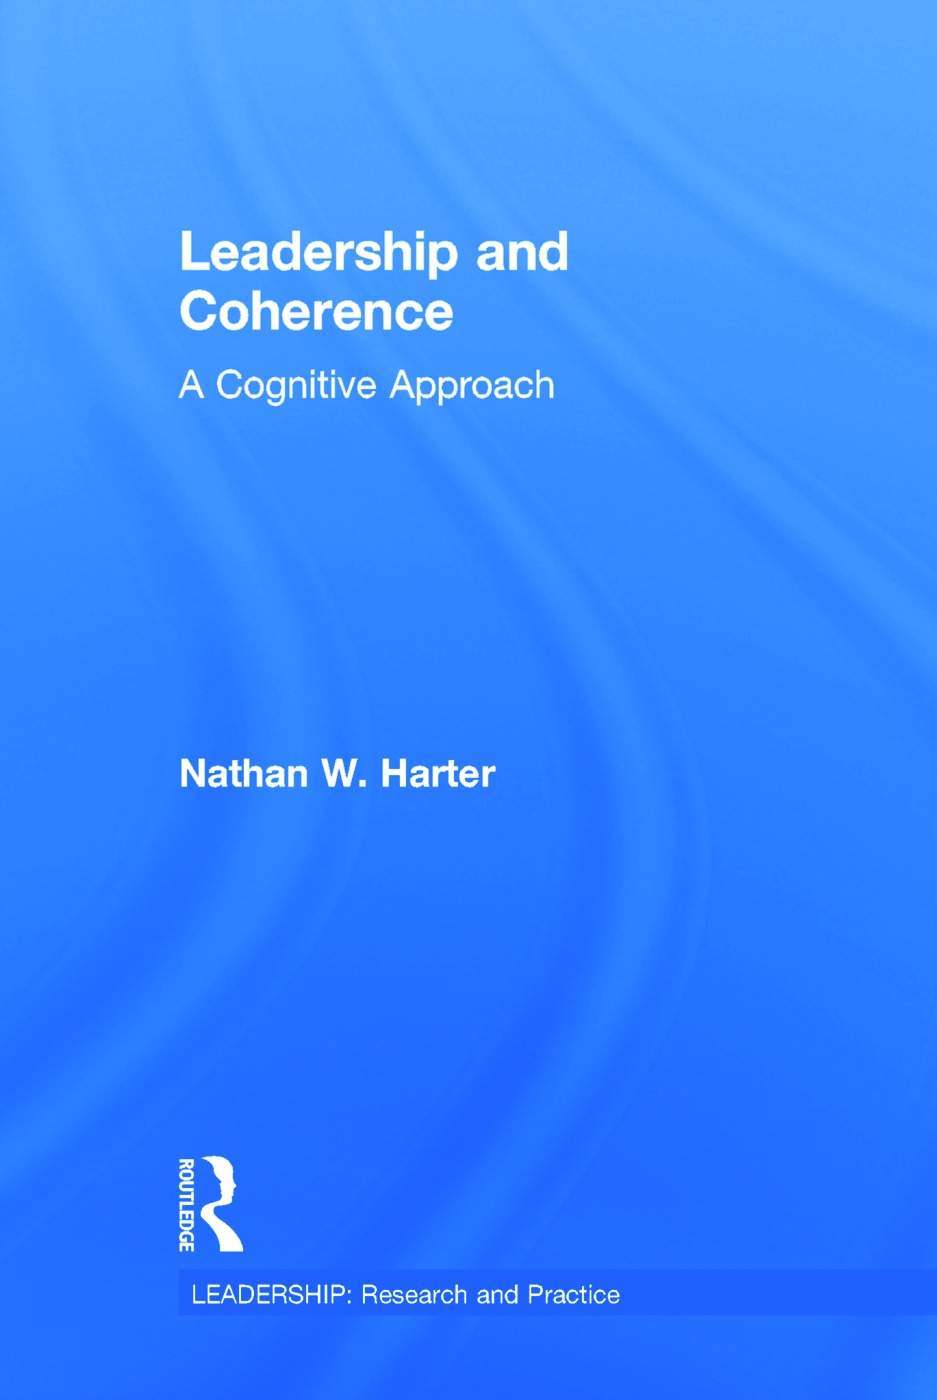 Leadership and Coherence: A Cognitive Approach